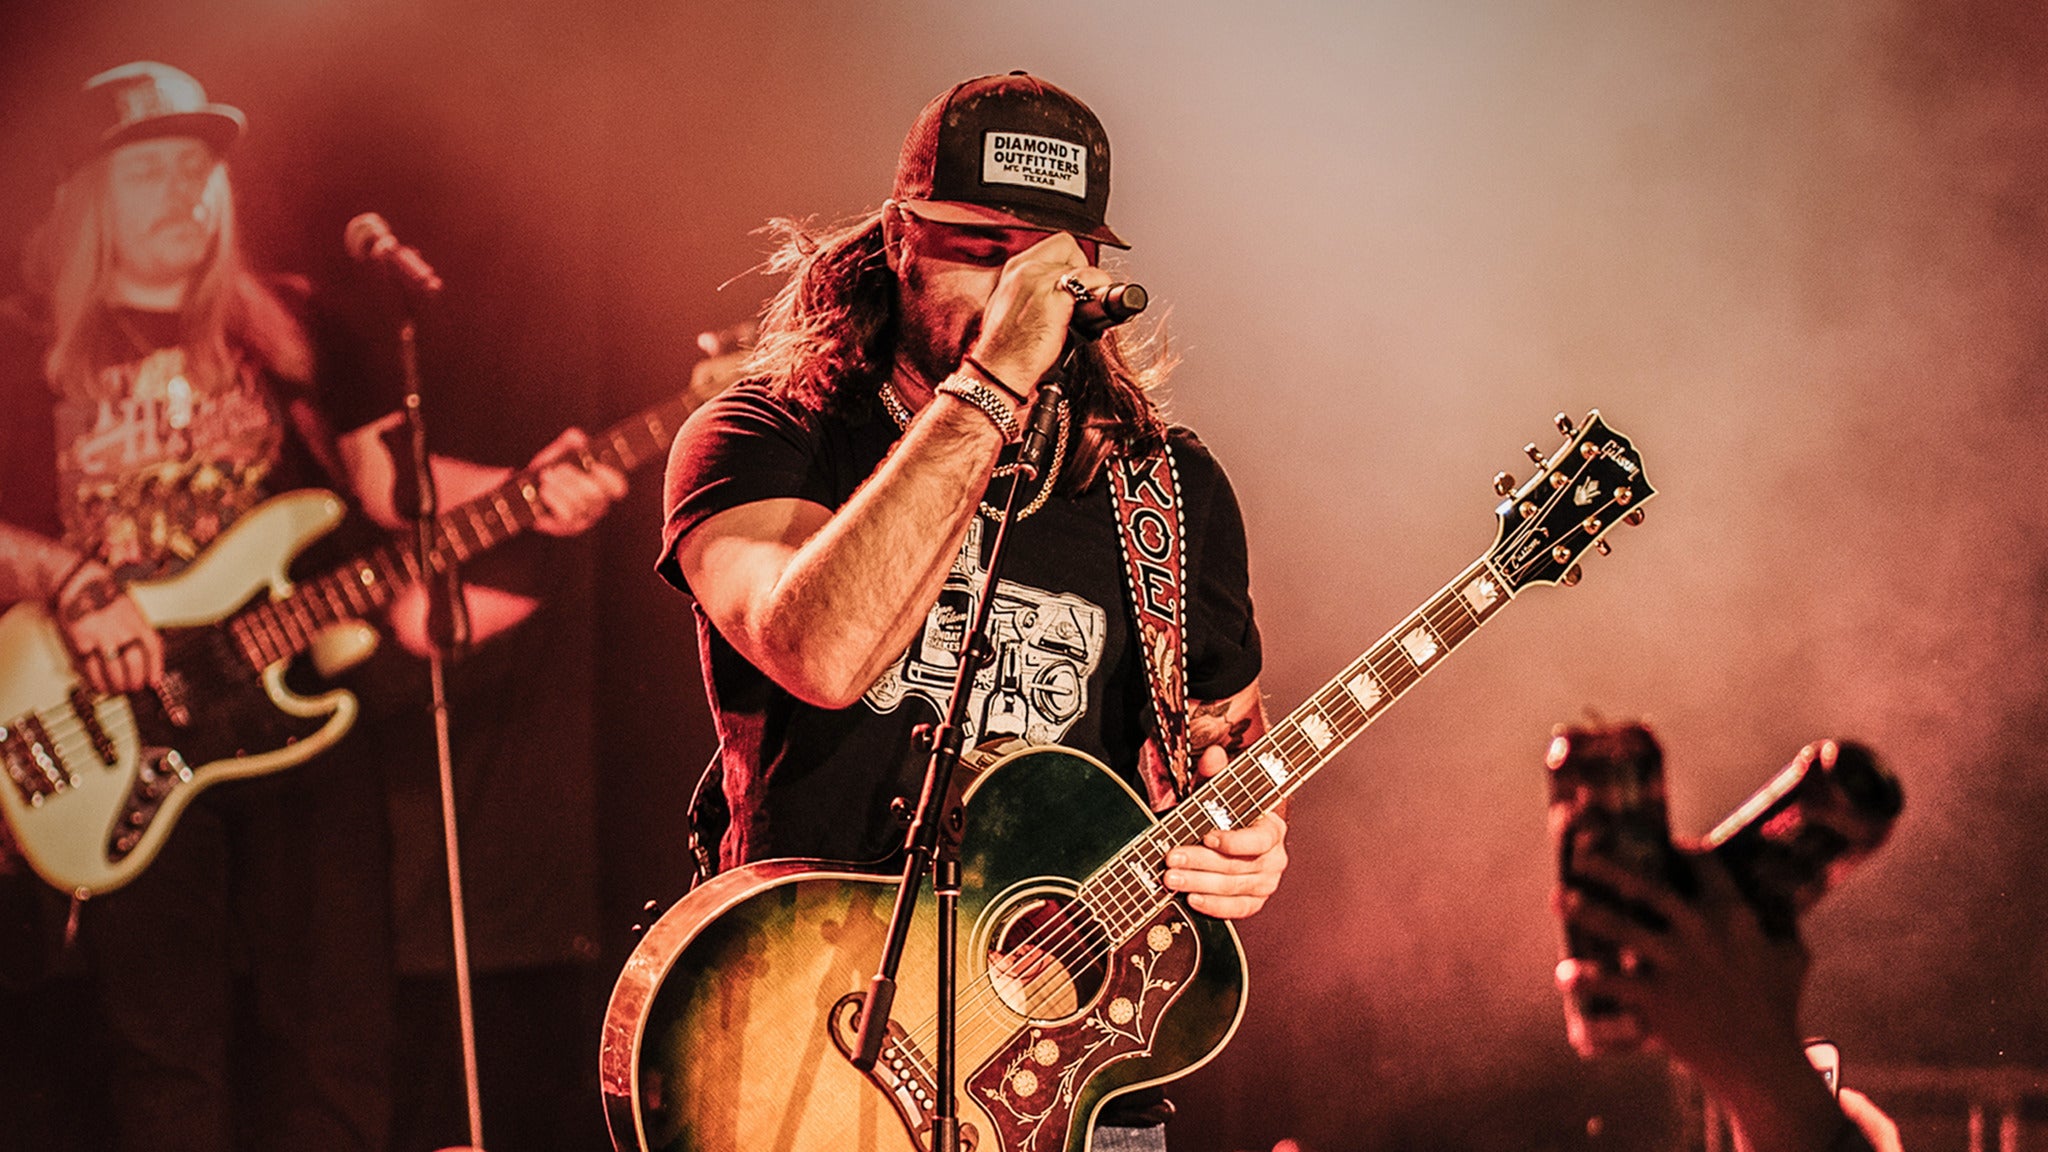 Image used with permission from Ticketmaster | Koe Wetzel tickets